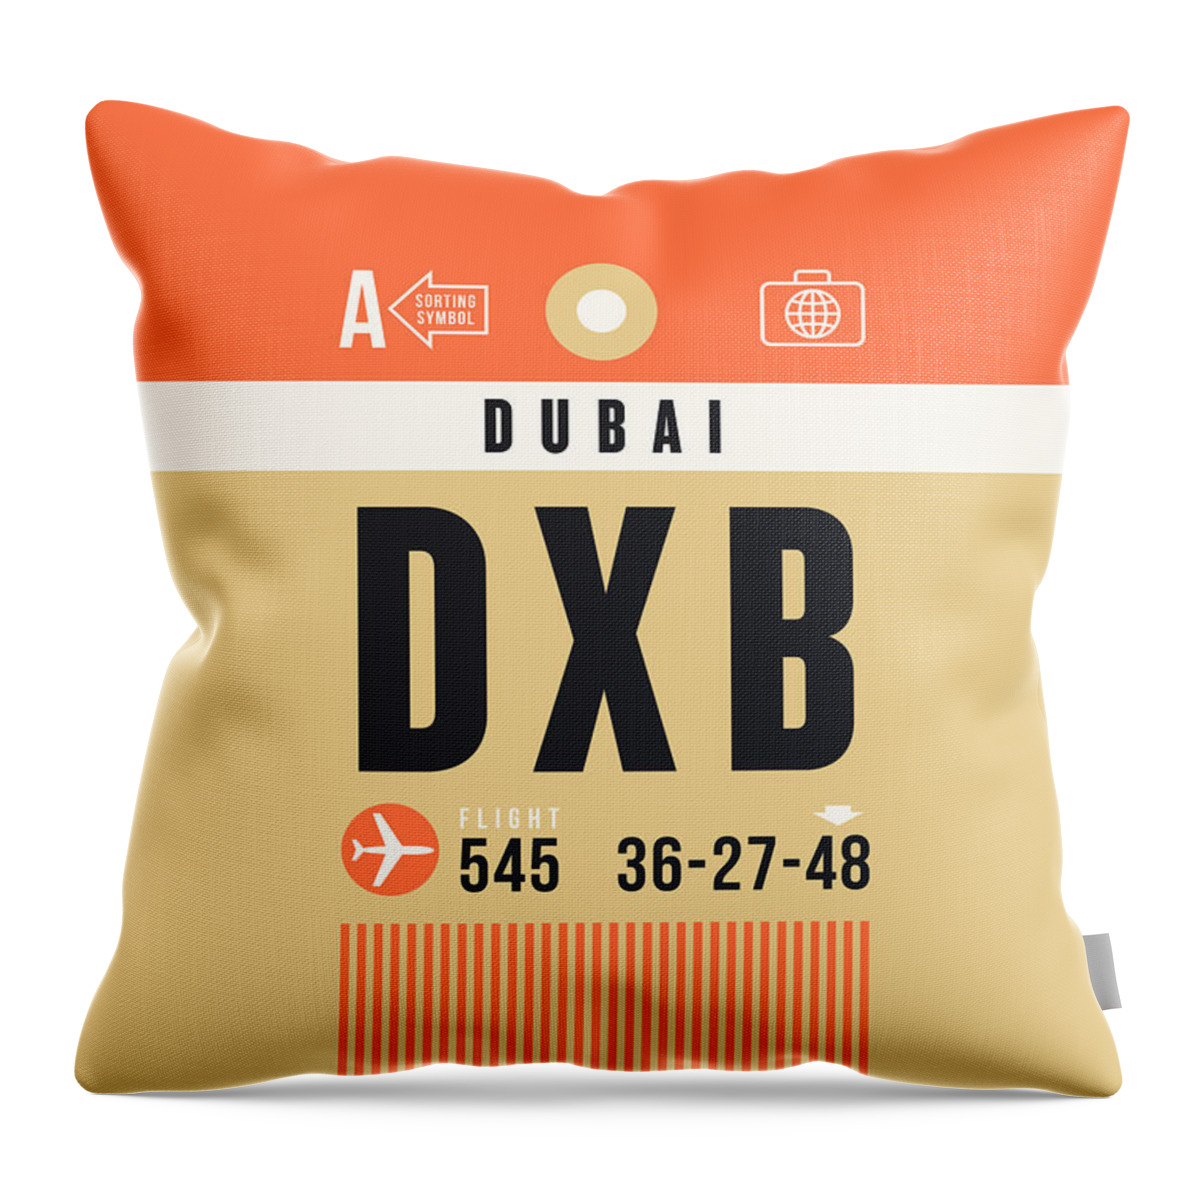 Airline Throw Pillow featuring the digital art Luggage Tag A - DXB Dubai UAE by Organic Synthesis